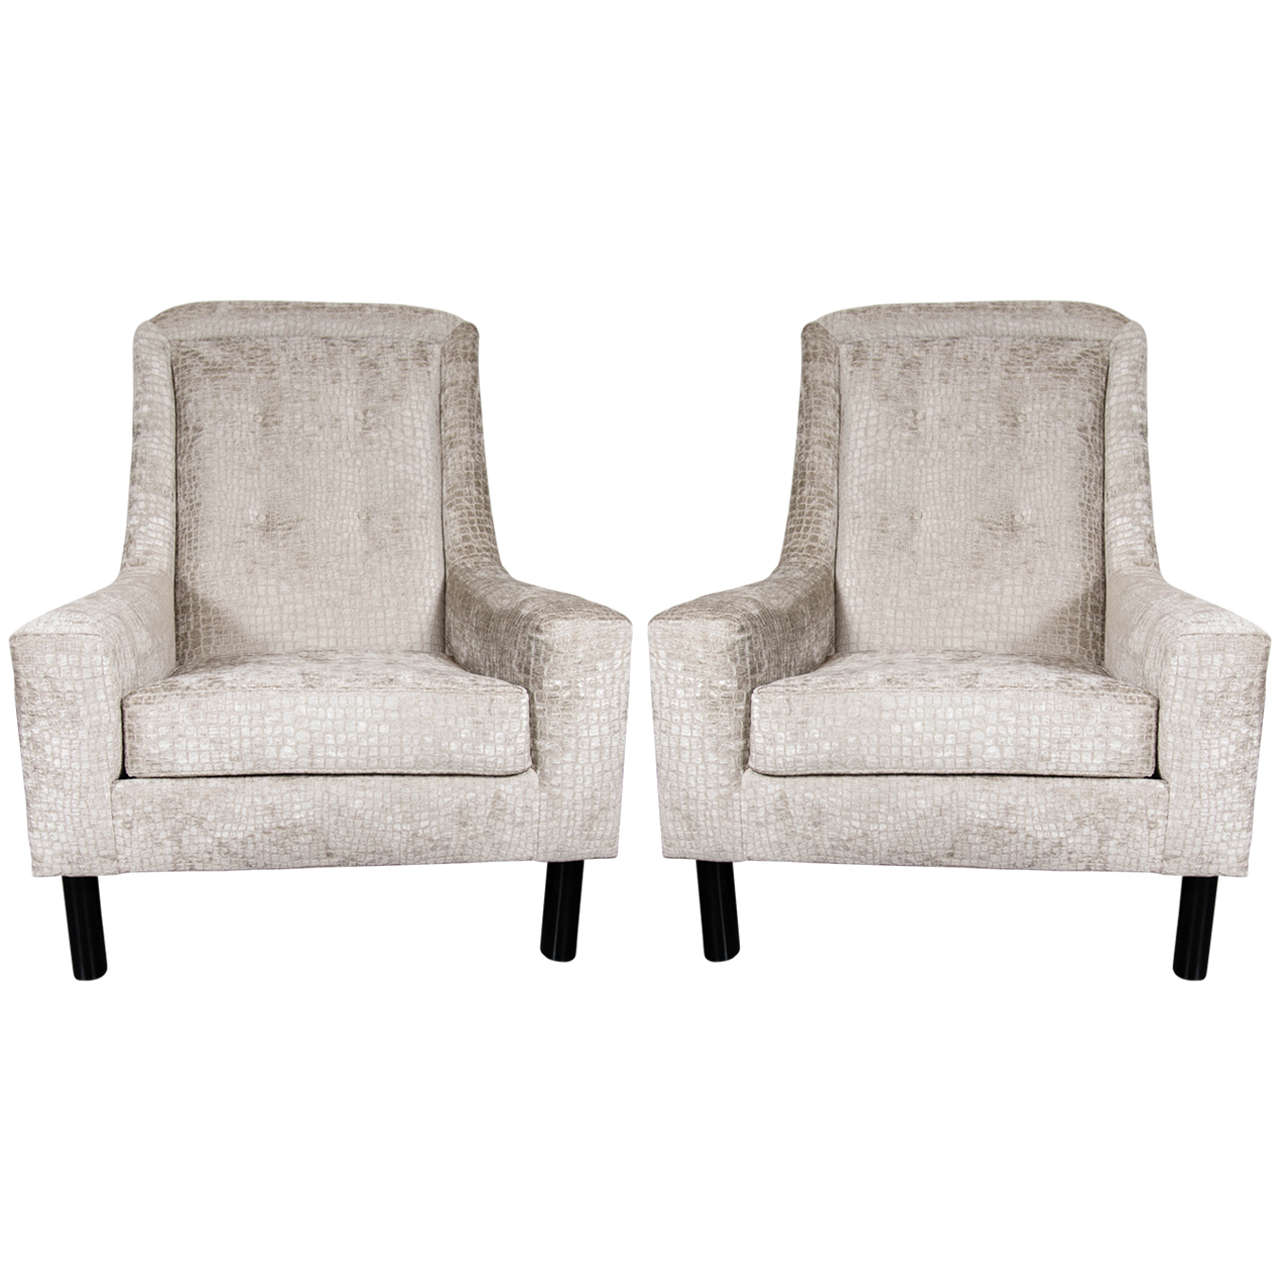 Pair of Sleigh-Form Armchairs in Gauffrage Croc Upholstery